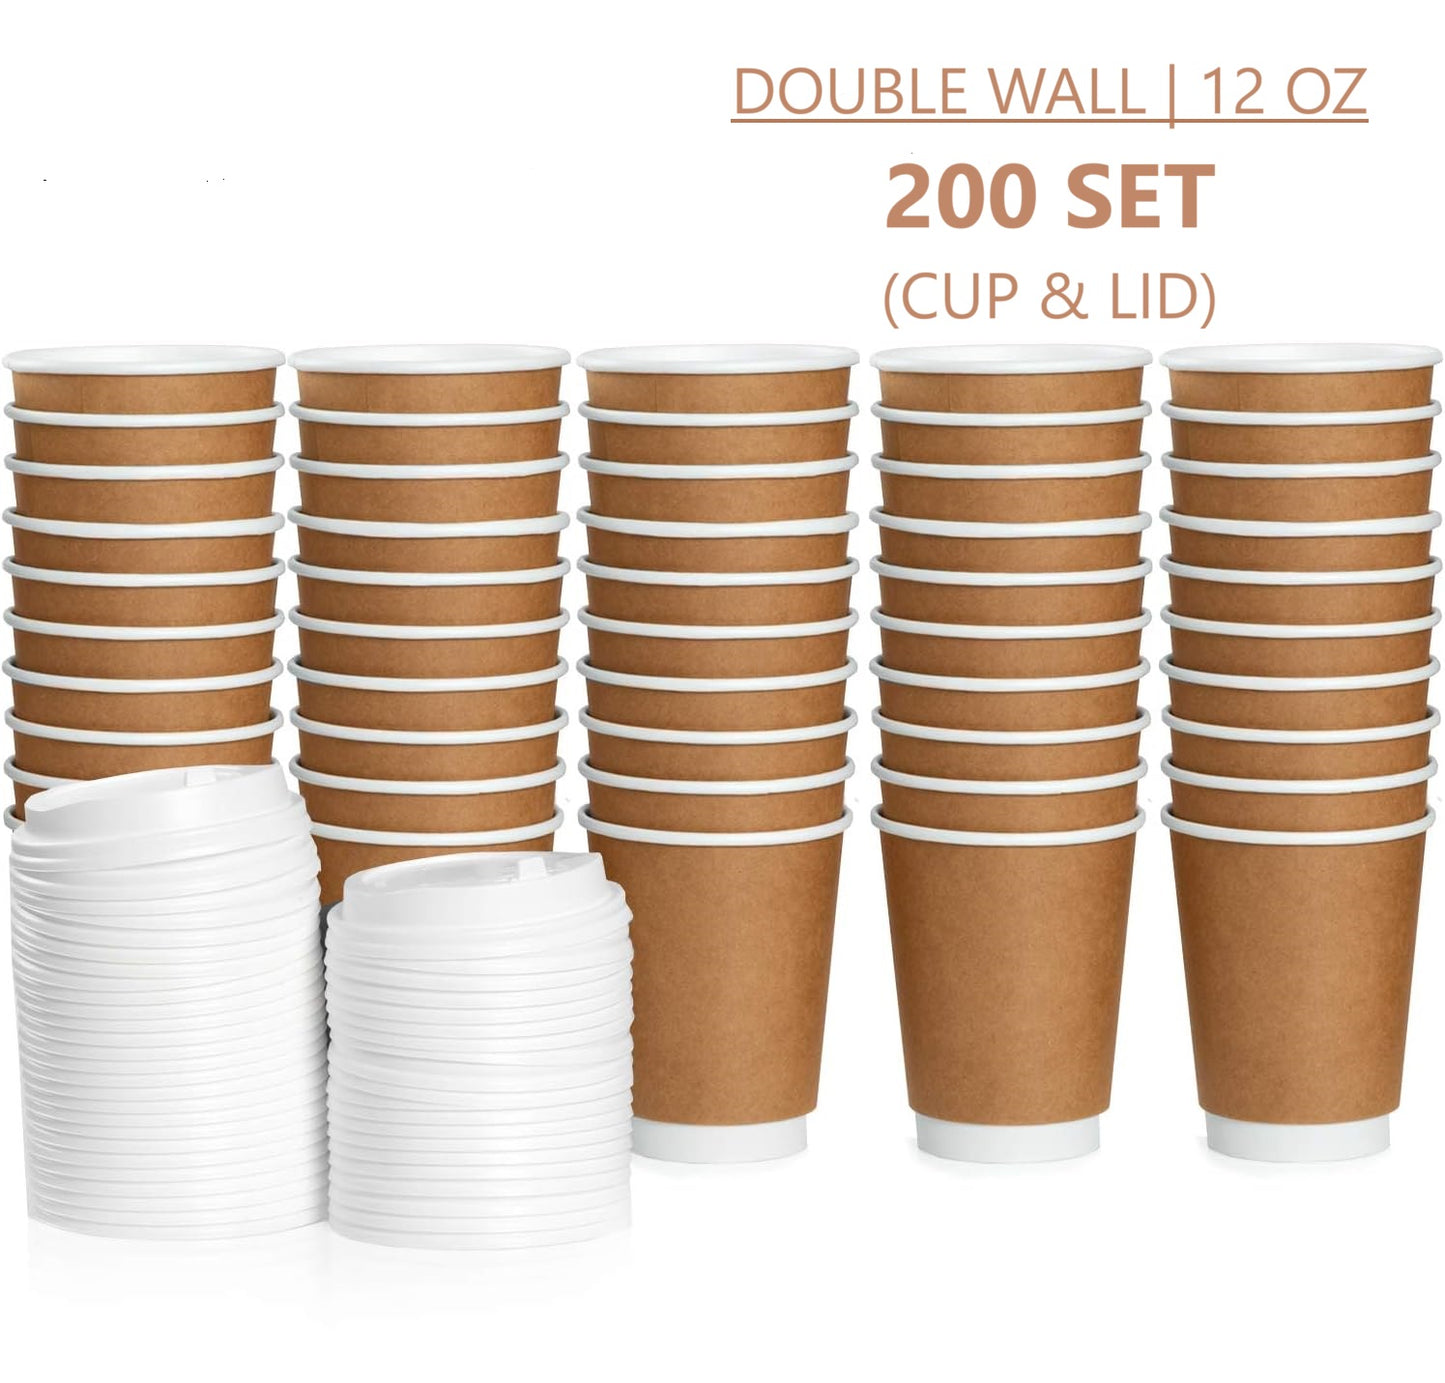 Buy Double Wall Kraft Paper Hot Cup 12 Oz For Coffee, Hot Chocolate & Tea